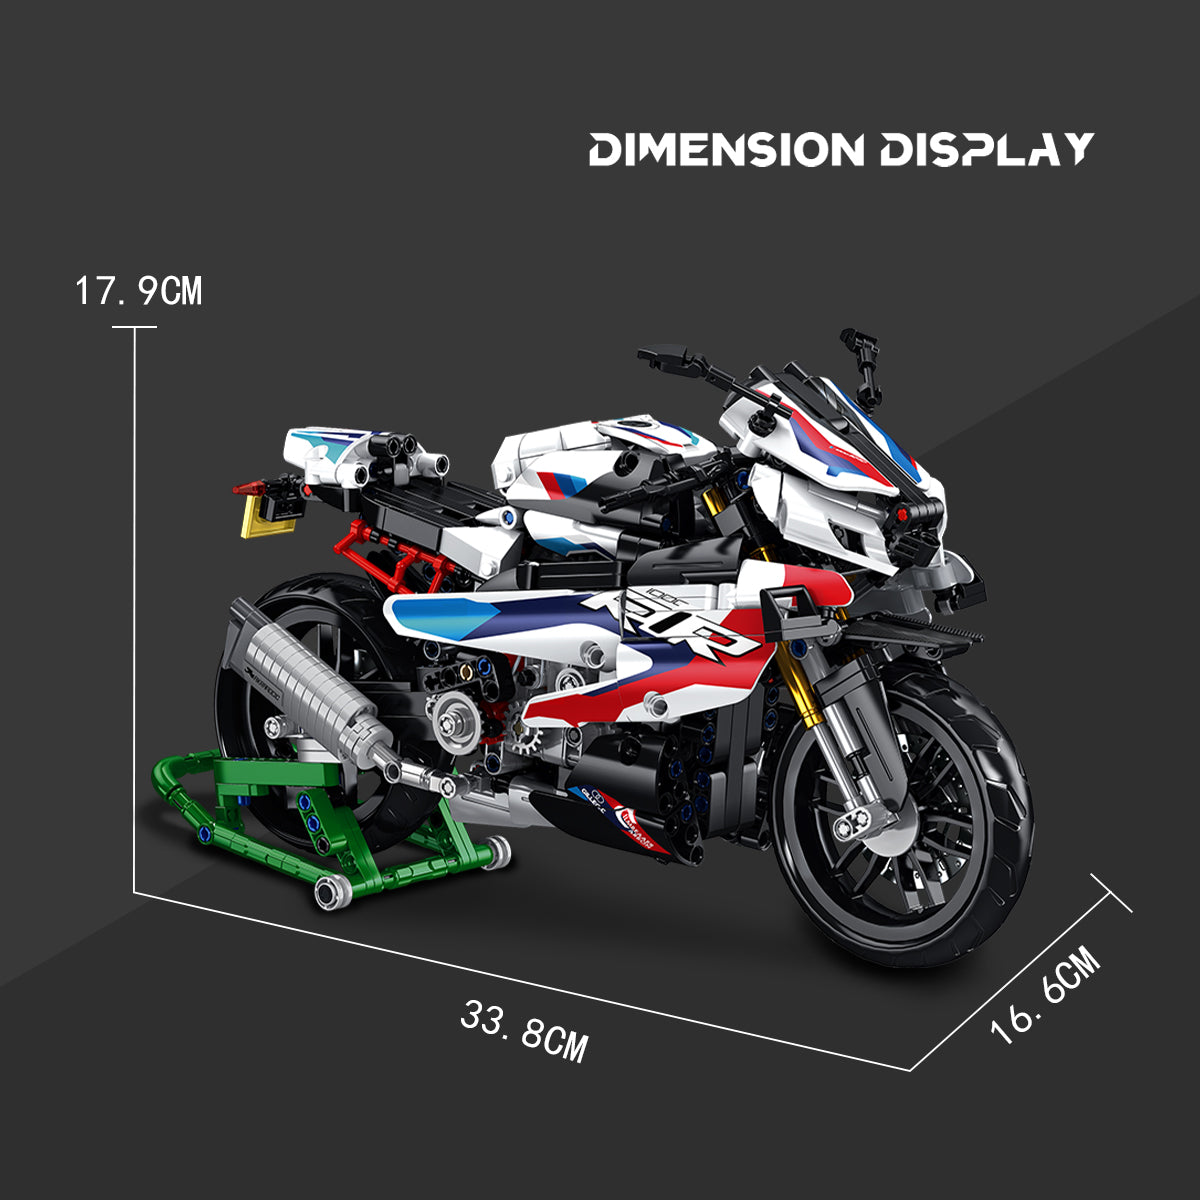 DAHONPA BMW Motorcycle 1000 RR Model Building Blocks Set, 912 Pieces Bricks, MOC Toys as Gift for Kids or Adult